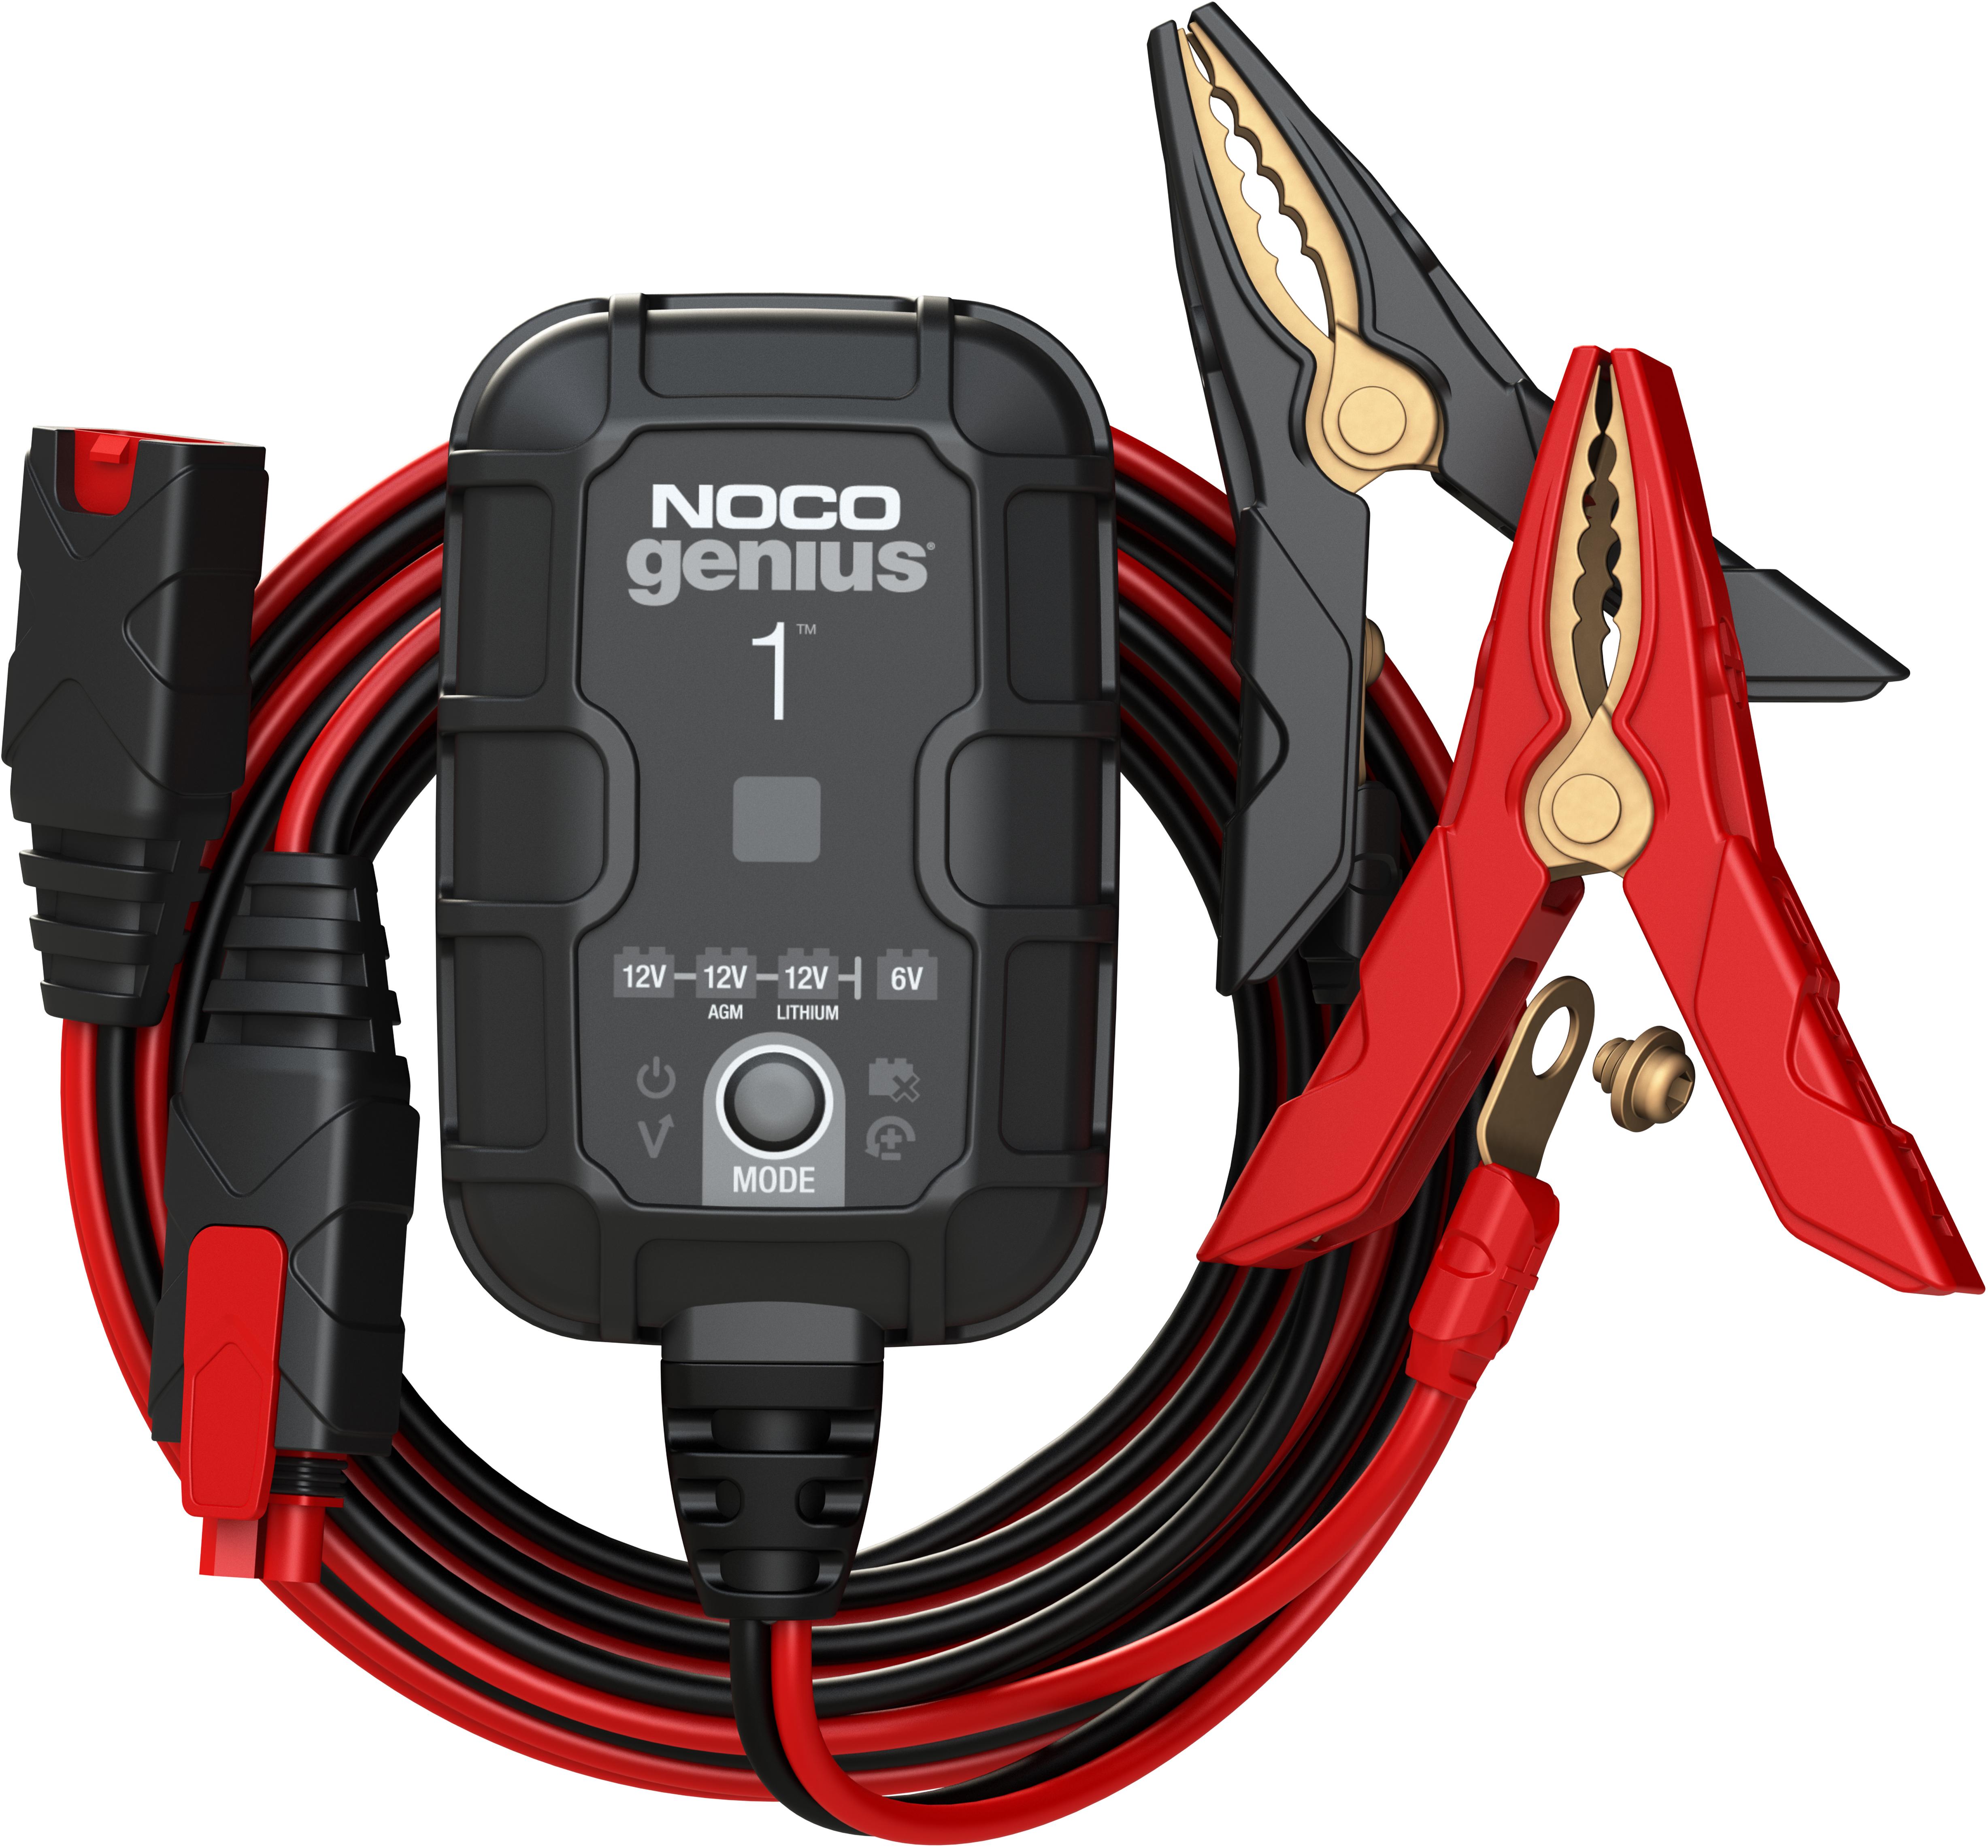 Noco Genius1 1-Amp Battery Charger